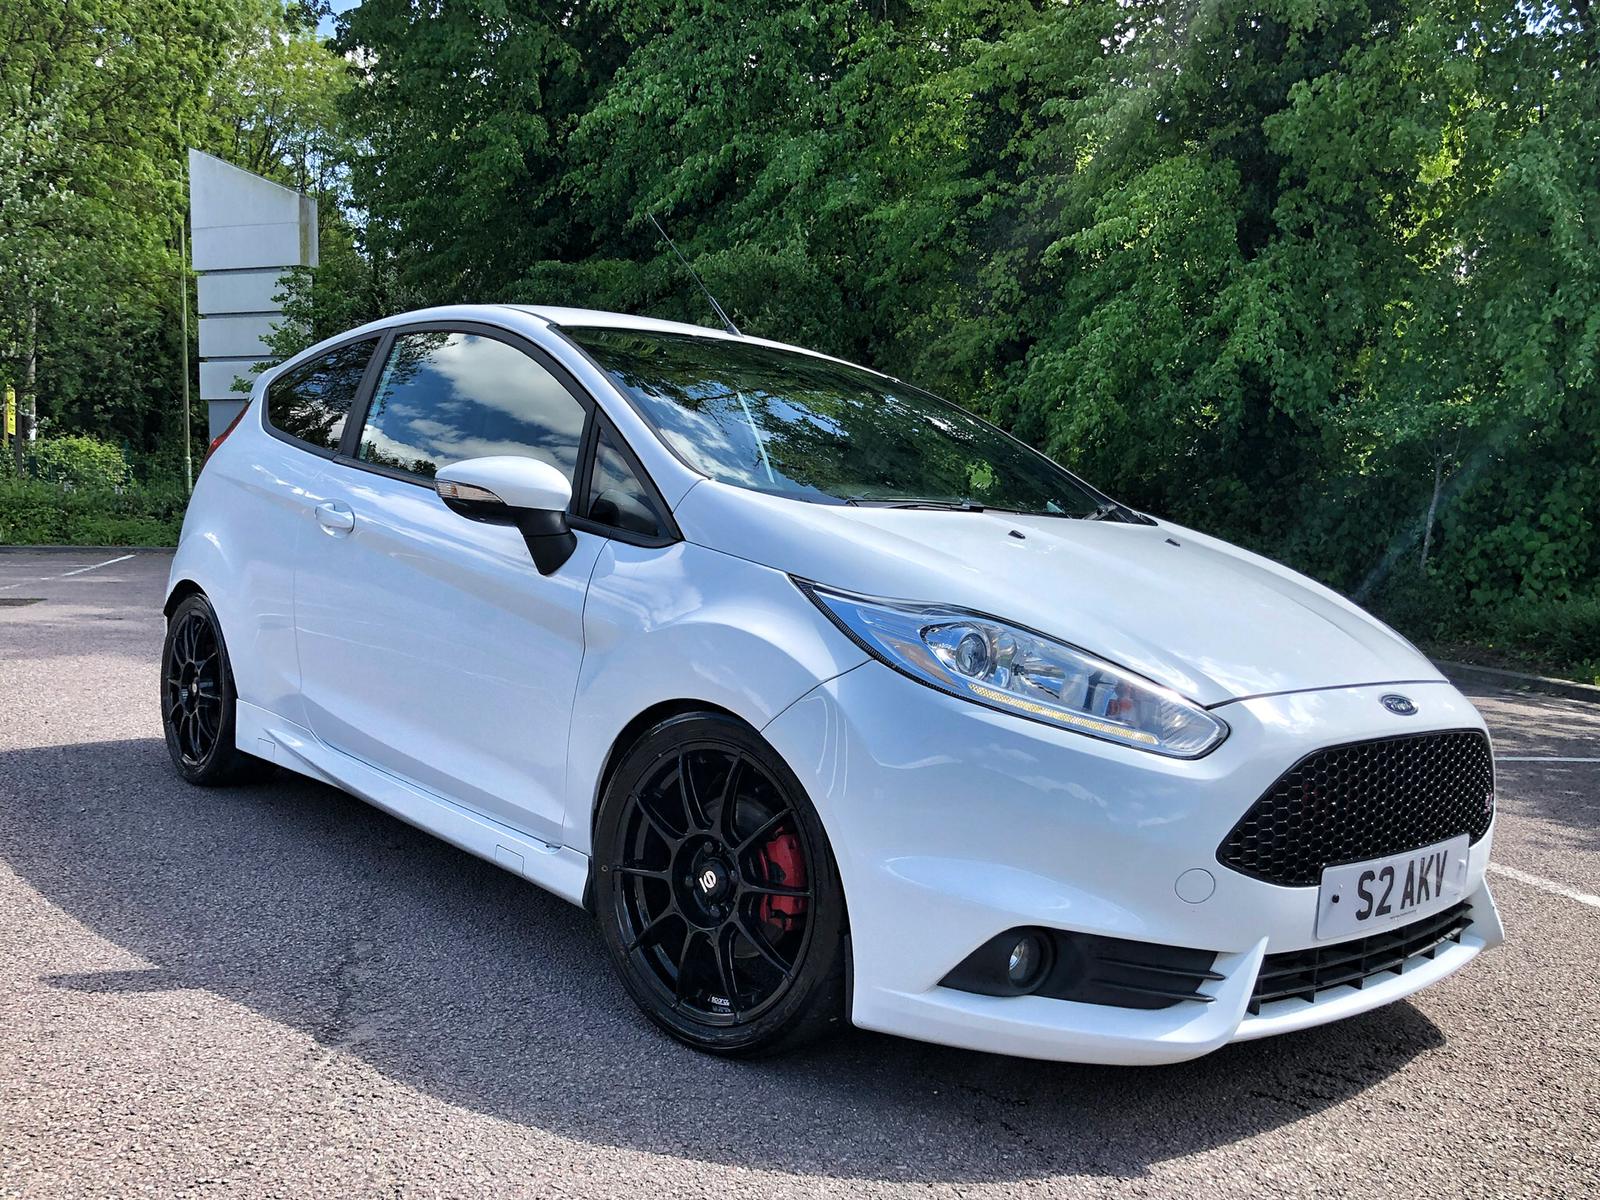 Sparco FF flow Formed lightweight wheel for Fiesta ST 17" Jamie Officially gassed